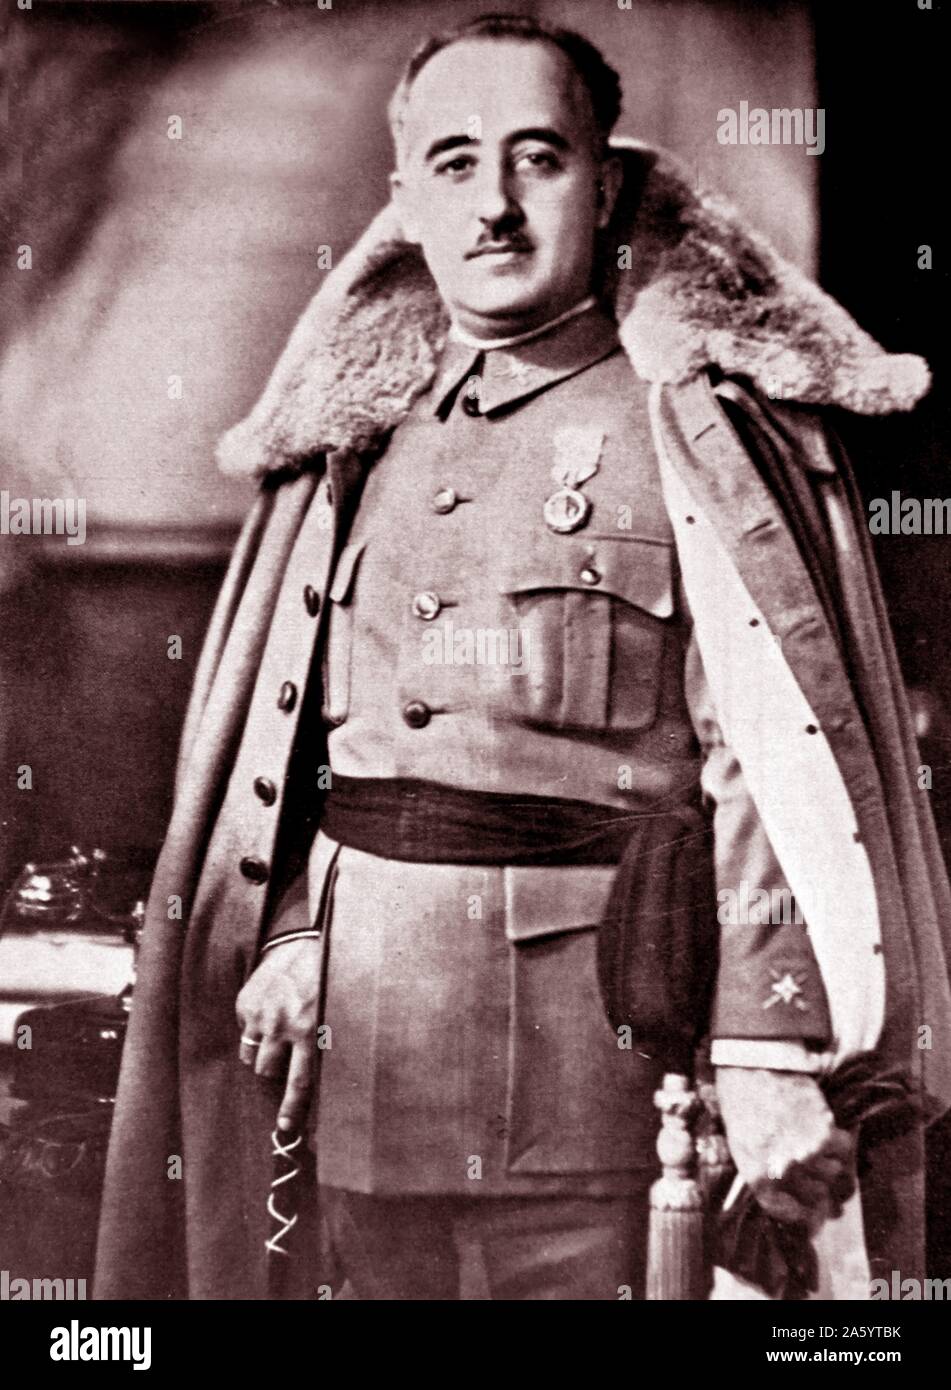 Francisco Franco (1892 – 1975) Spanish general and the dictator of Spain from 1939 until his death in 1975. Formal portrait during the Spanish Civil War Stock Photo